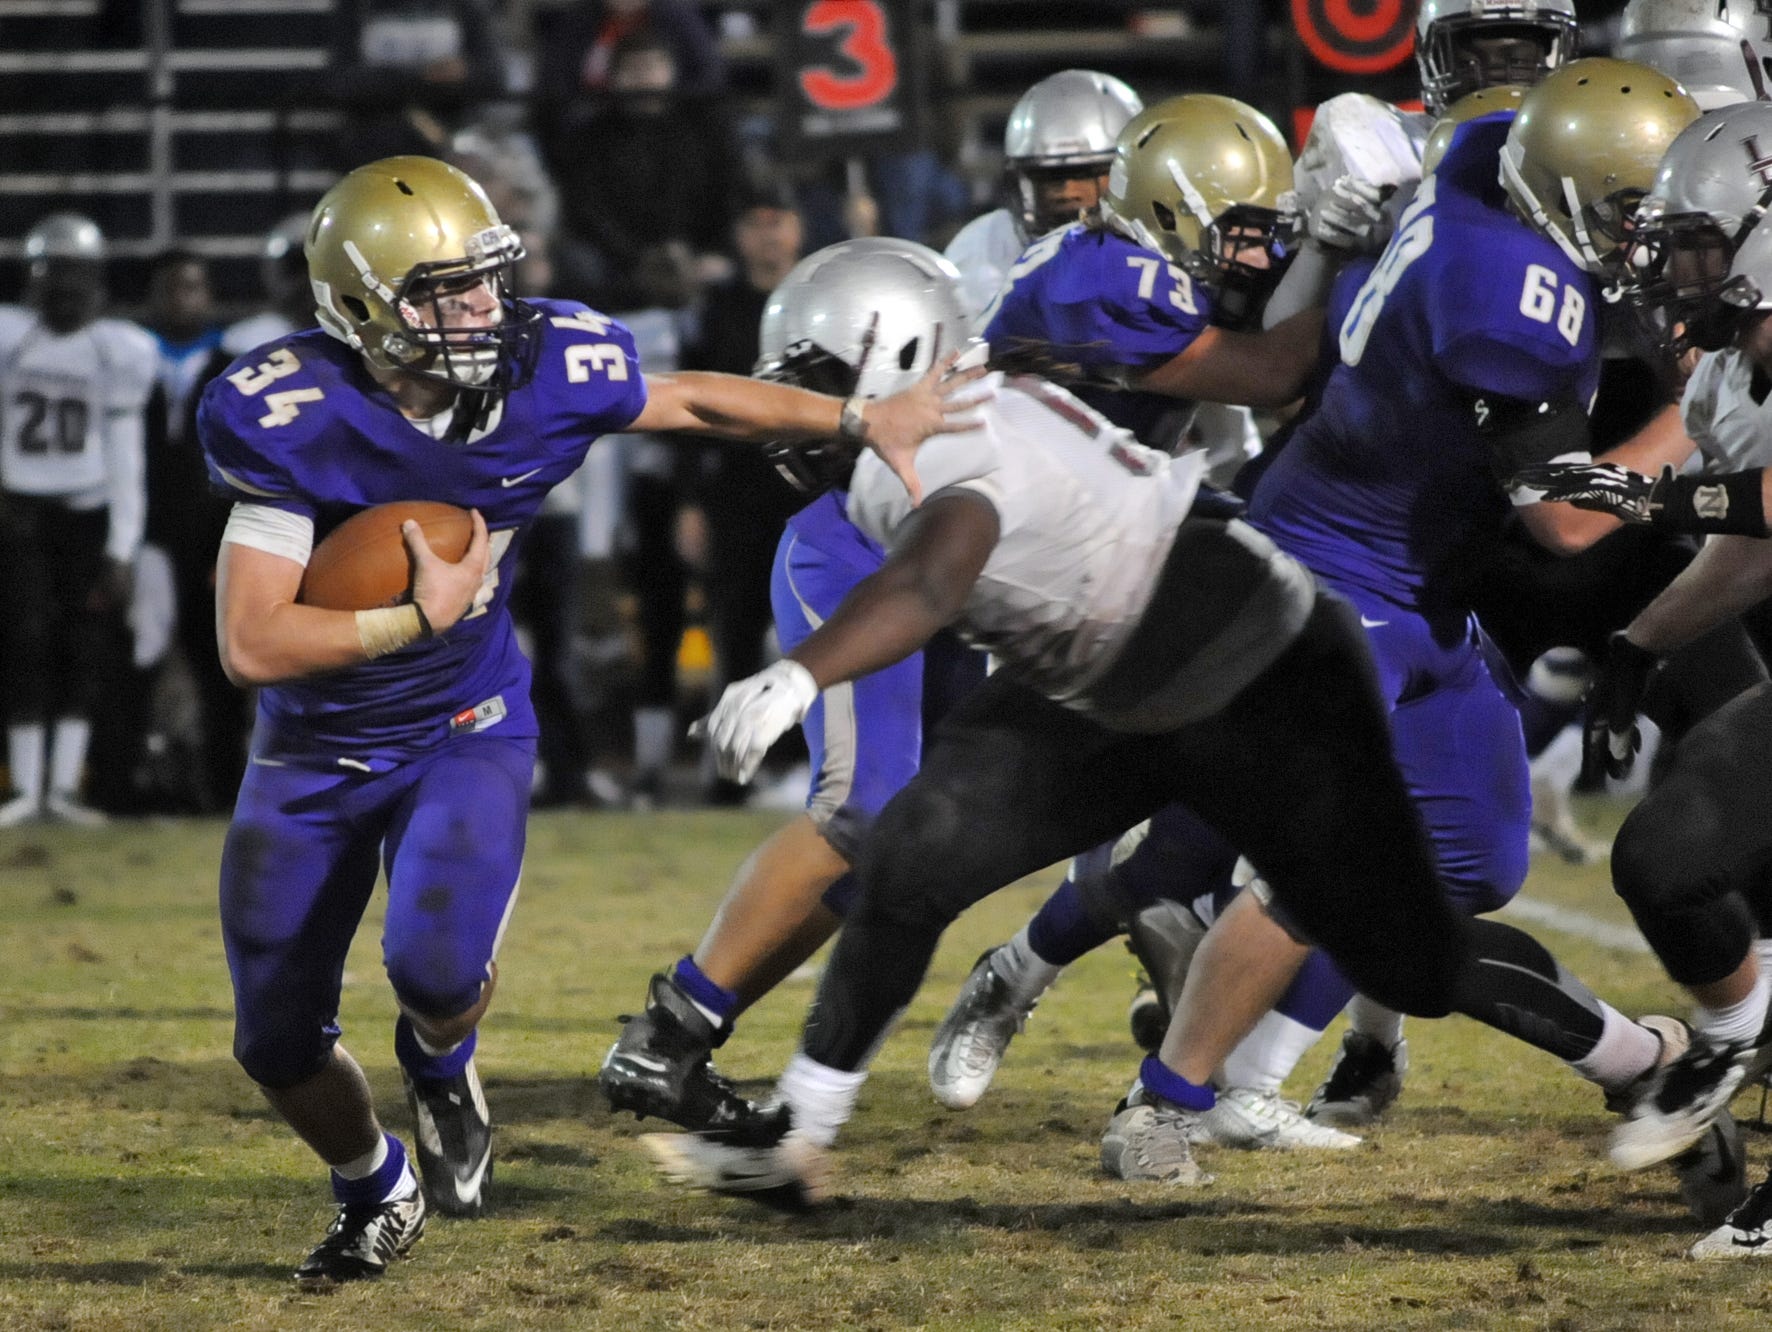 CPA's James Deaton looks to get by Liberty Magnet defenders in the fourth quarter of CPA's 21-0 3A semifinal win.